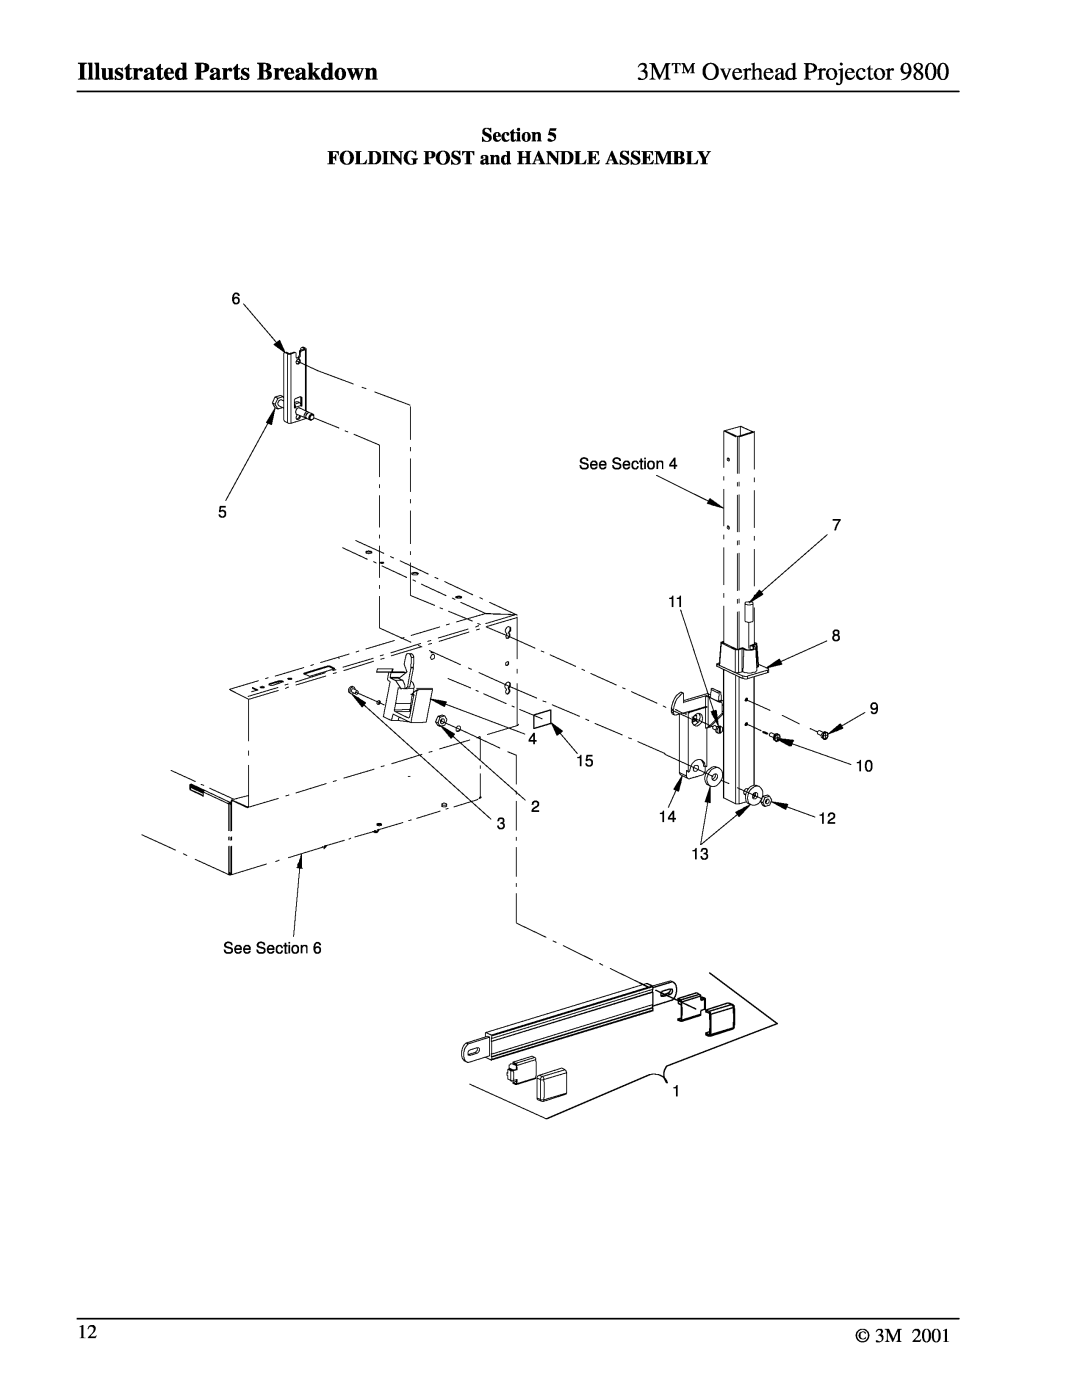 3M 9800 manual Section FOLDING POST and HANDLE ASSEMBLY, Illustrated Parts Breakdown, 3M Overhead Projector 